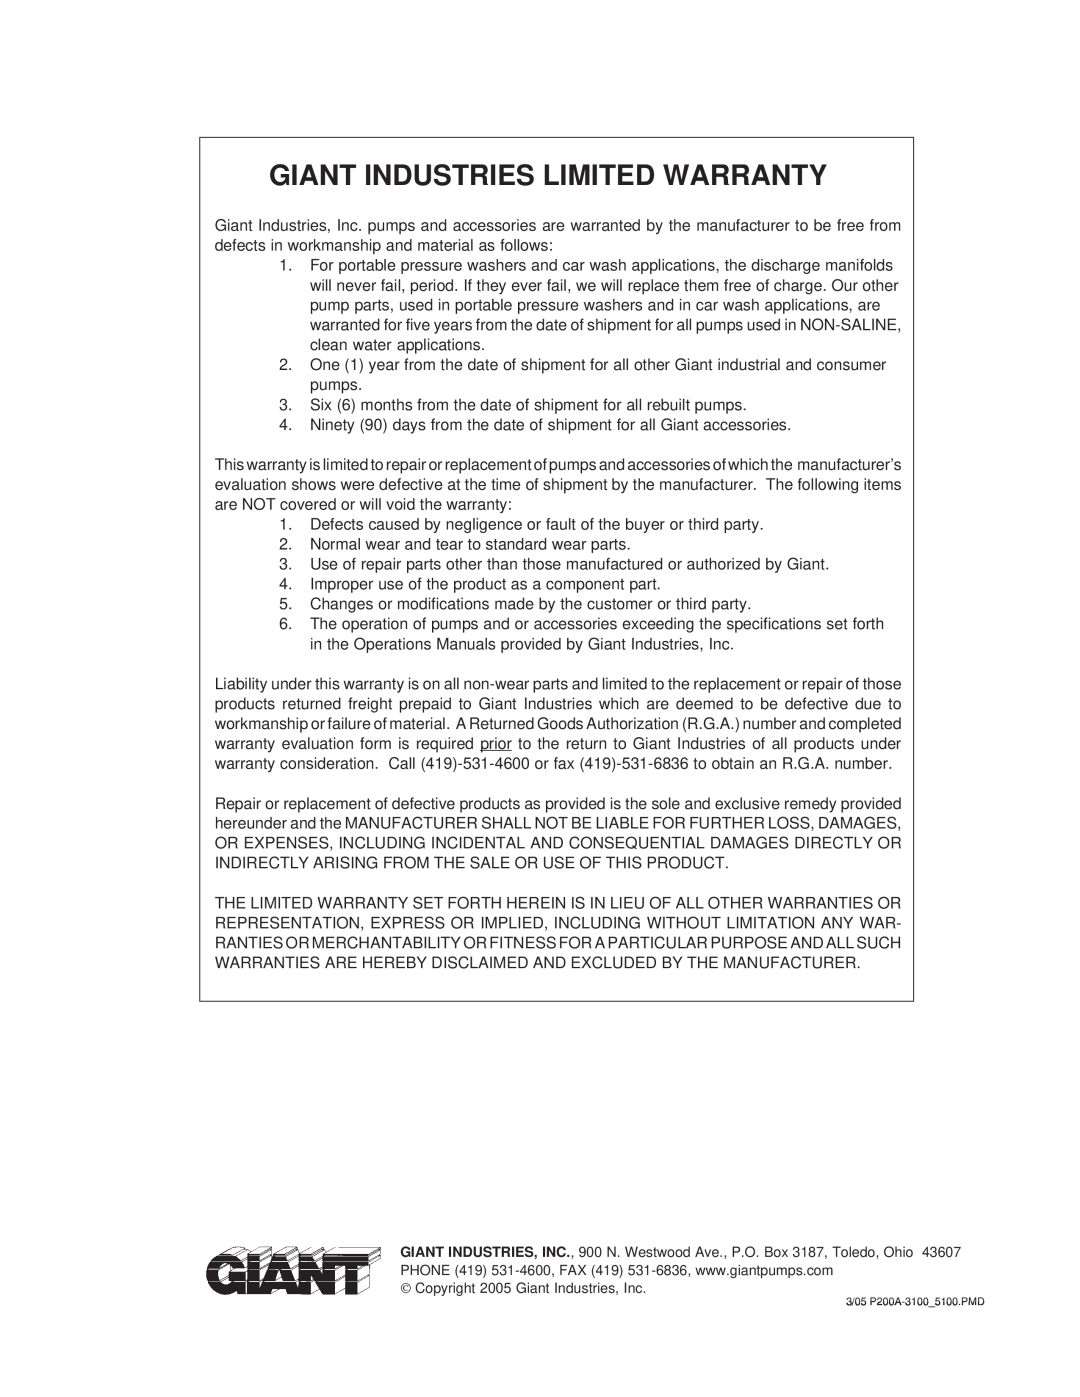 Giant P200A-3100, P200A-5100 installation instructions Giant Industries Limited Warranty 